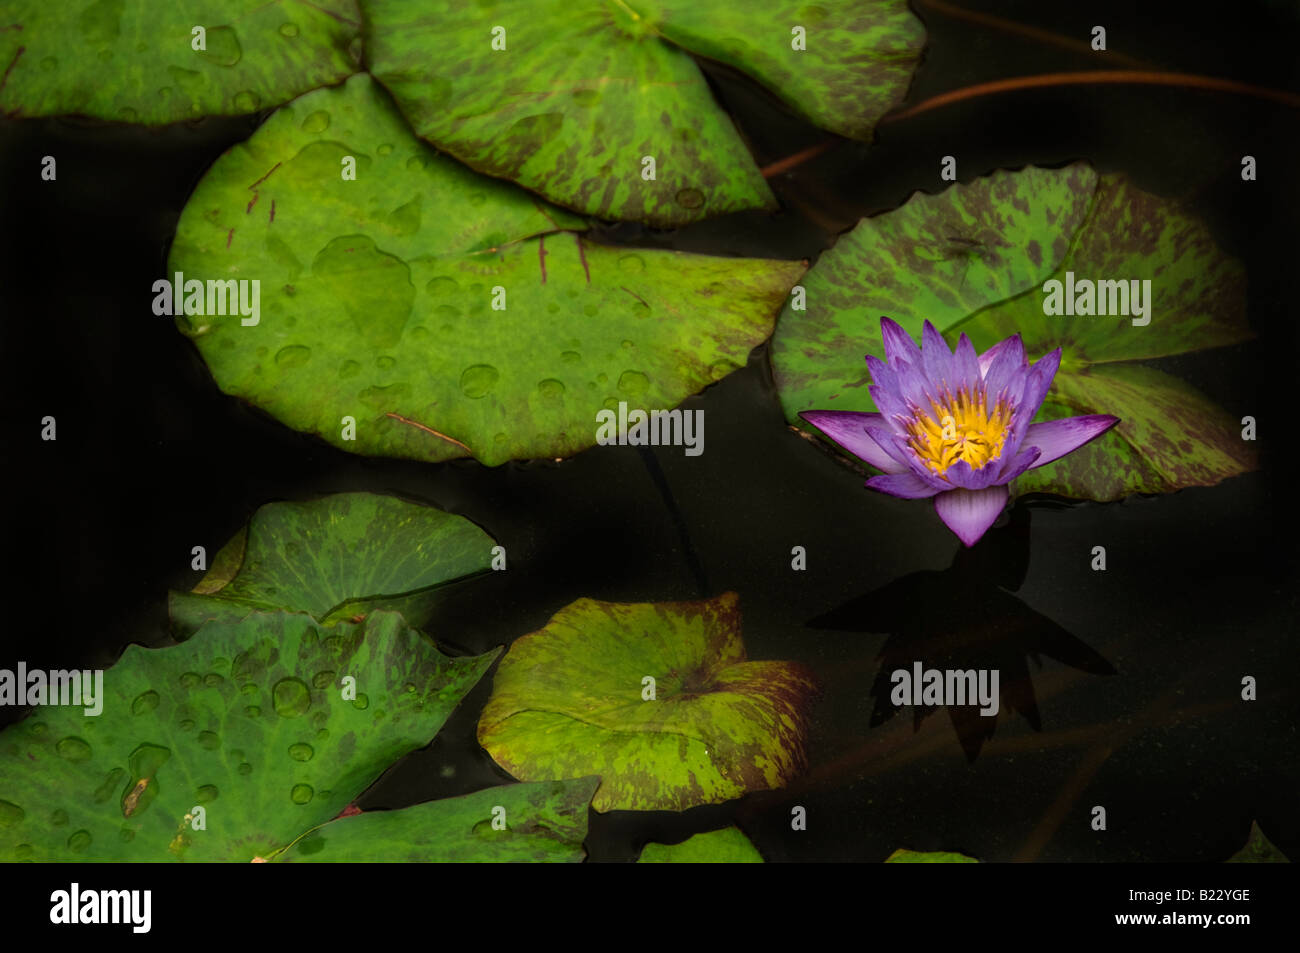 Water lily, lotus flower. Stock Photo